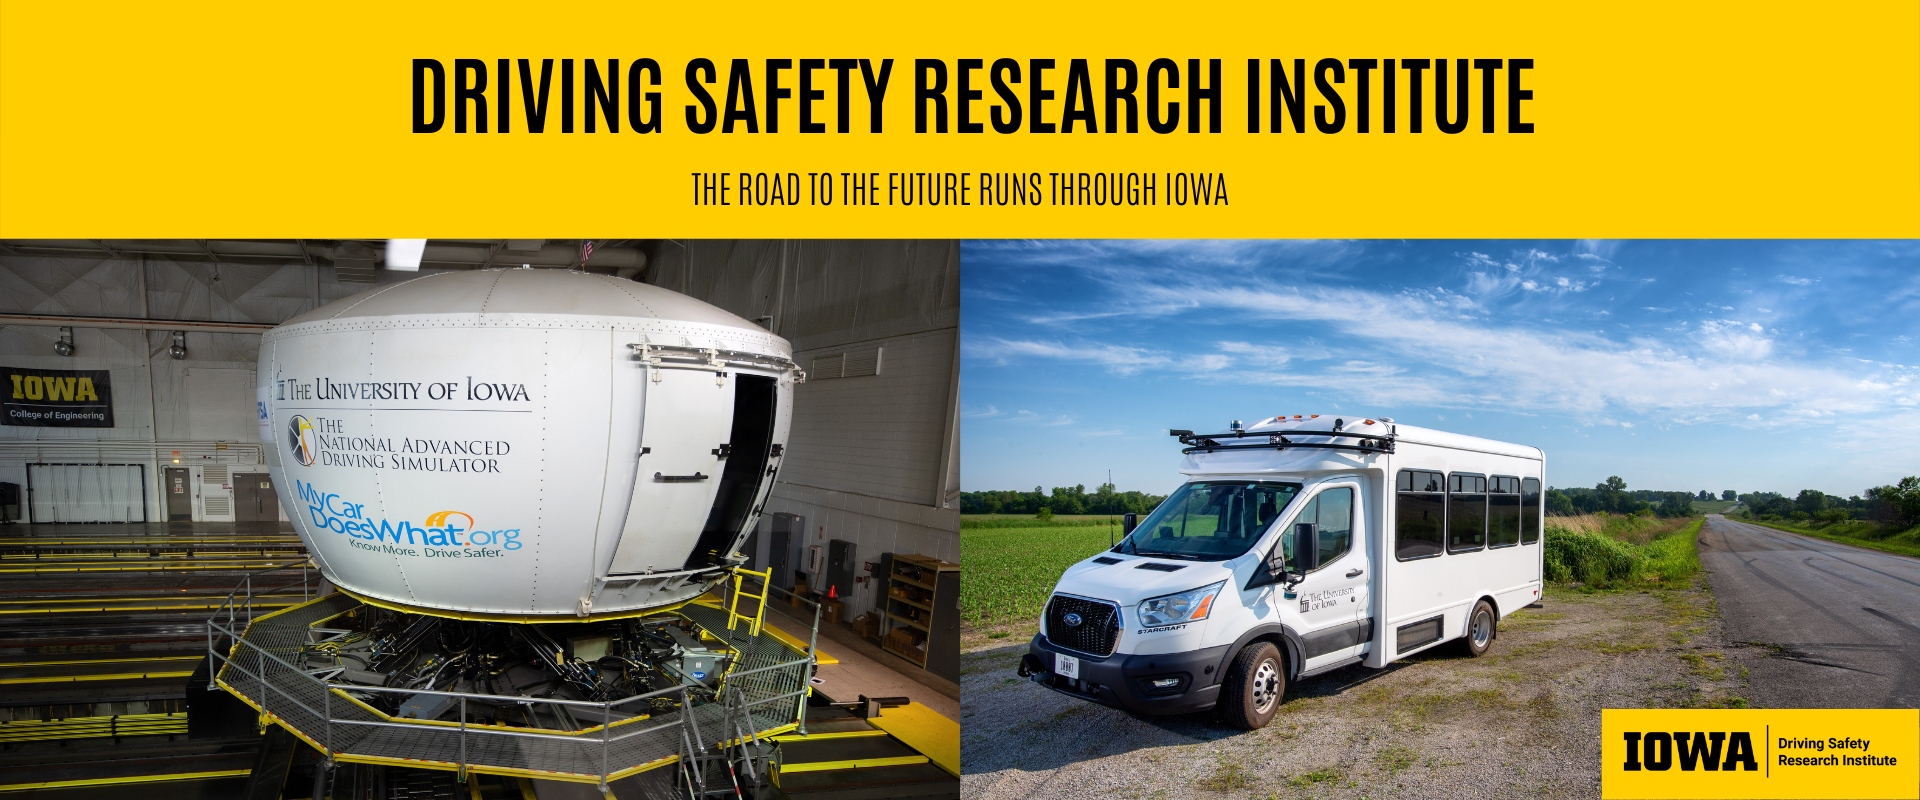 Driving Safety Research Institute